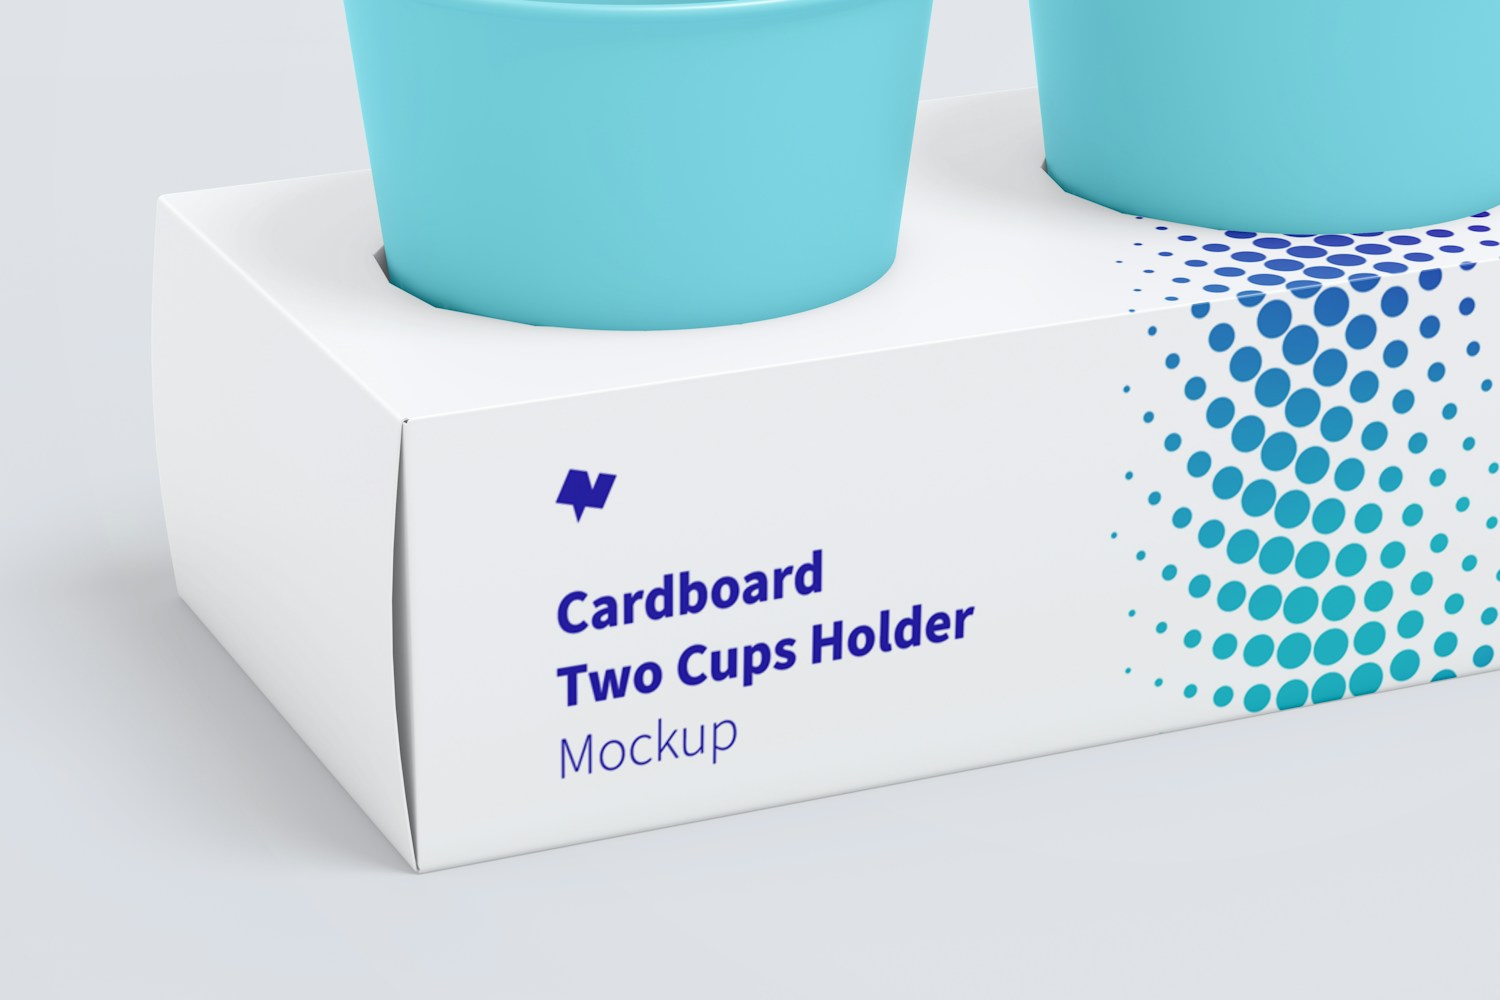 Cardboard Two Cups Holder Mockup, Close Up